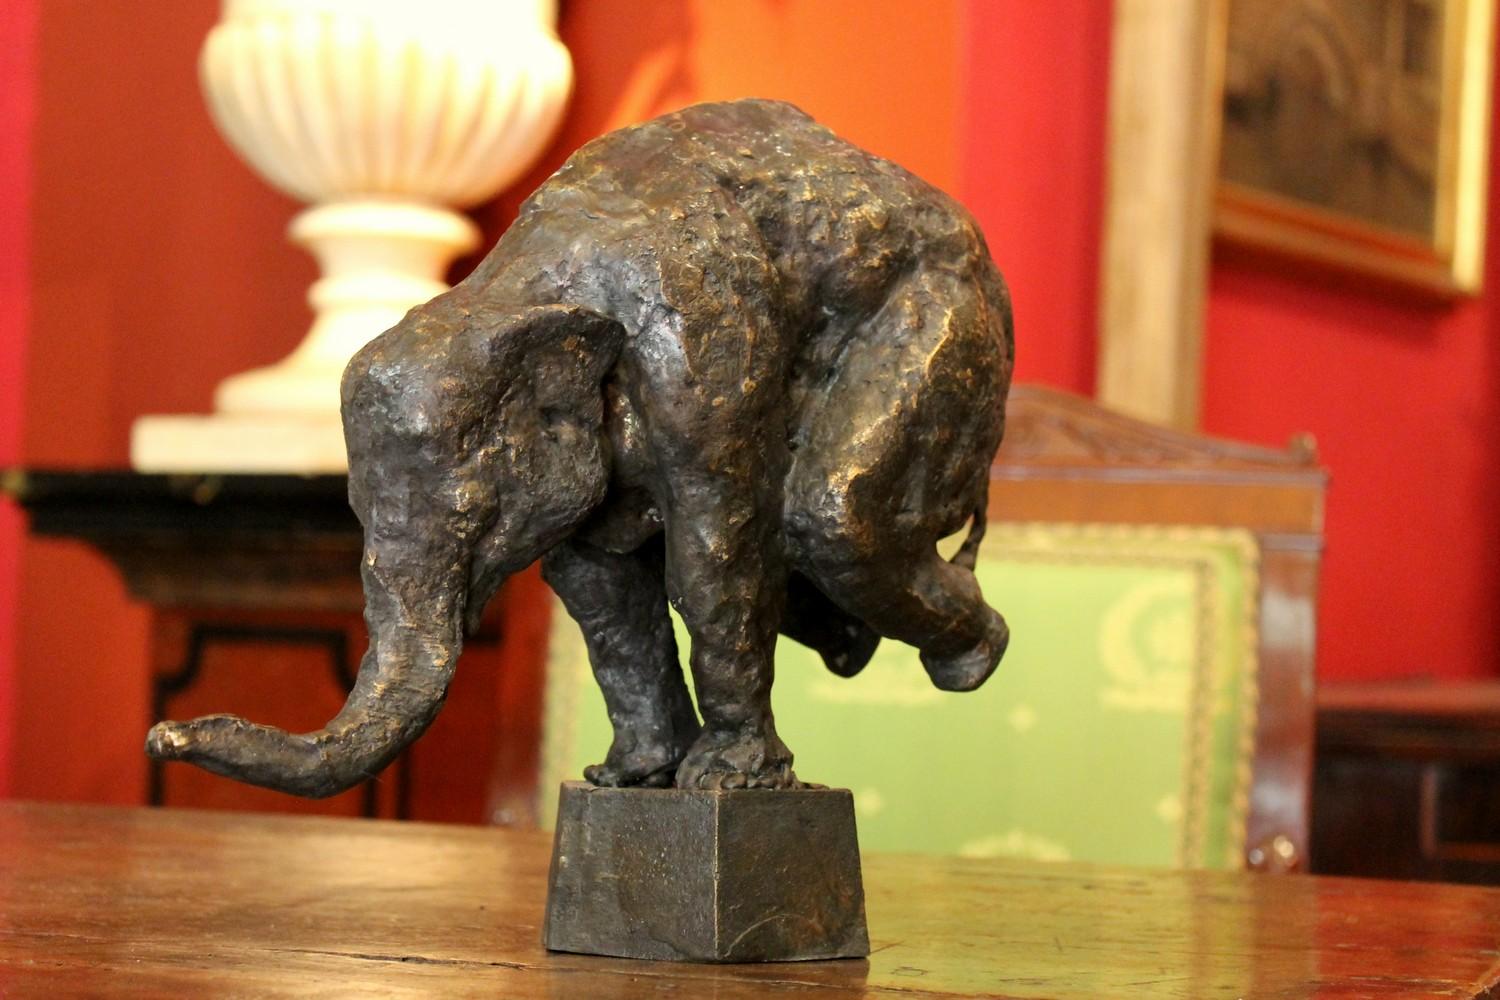 Through this bronze sculpture featuring a gold patina the artist takes us into an imaginative and fantastic world, the image of the elephant on the pedestal reminds us of the circus environment and is linked to childhood memories. In this case the